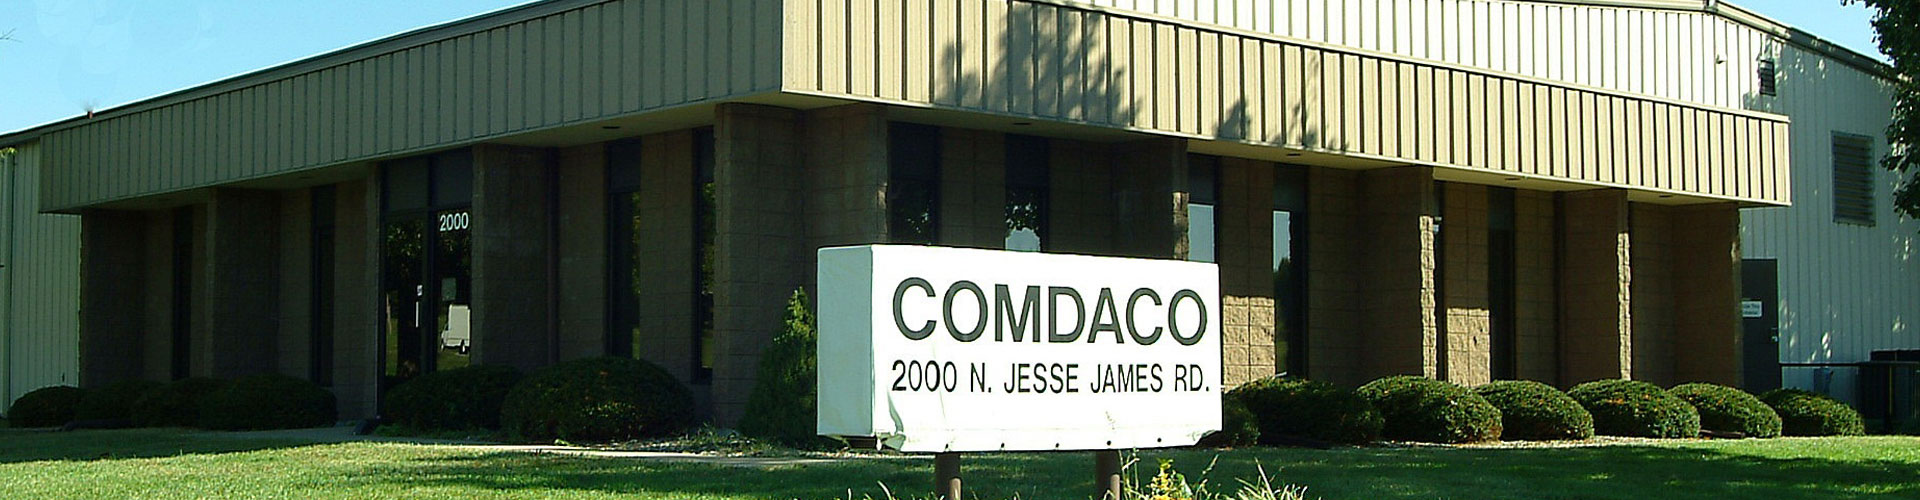 Terms and Conditions for Comdaco Rubber Manufacturing Services in Kansas City Missouri